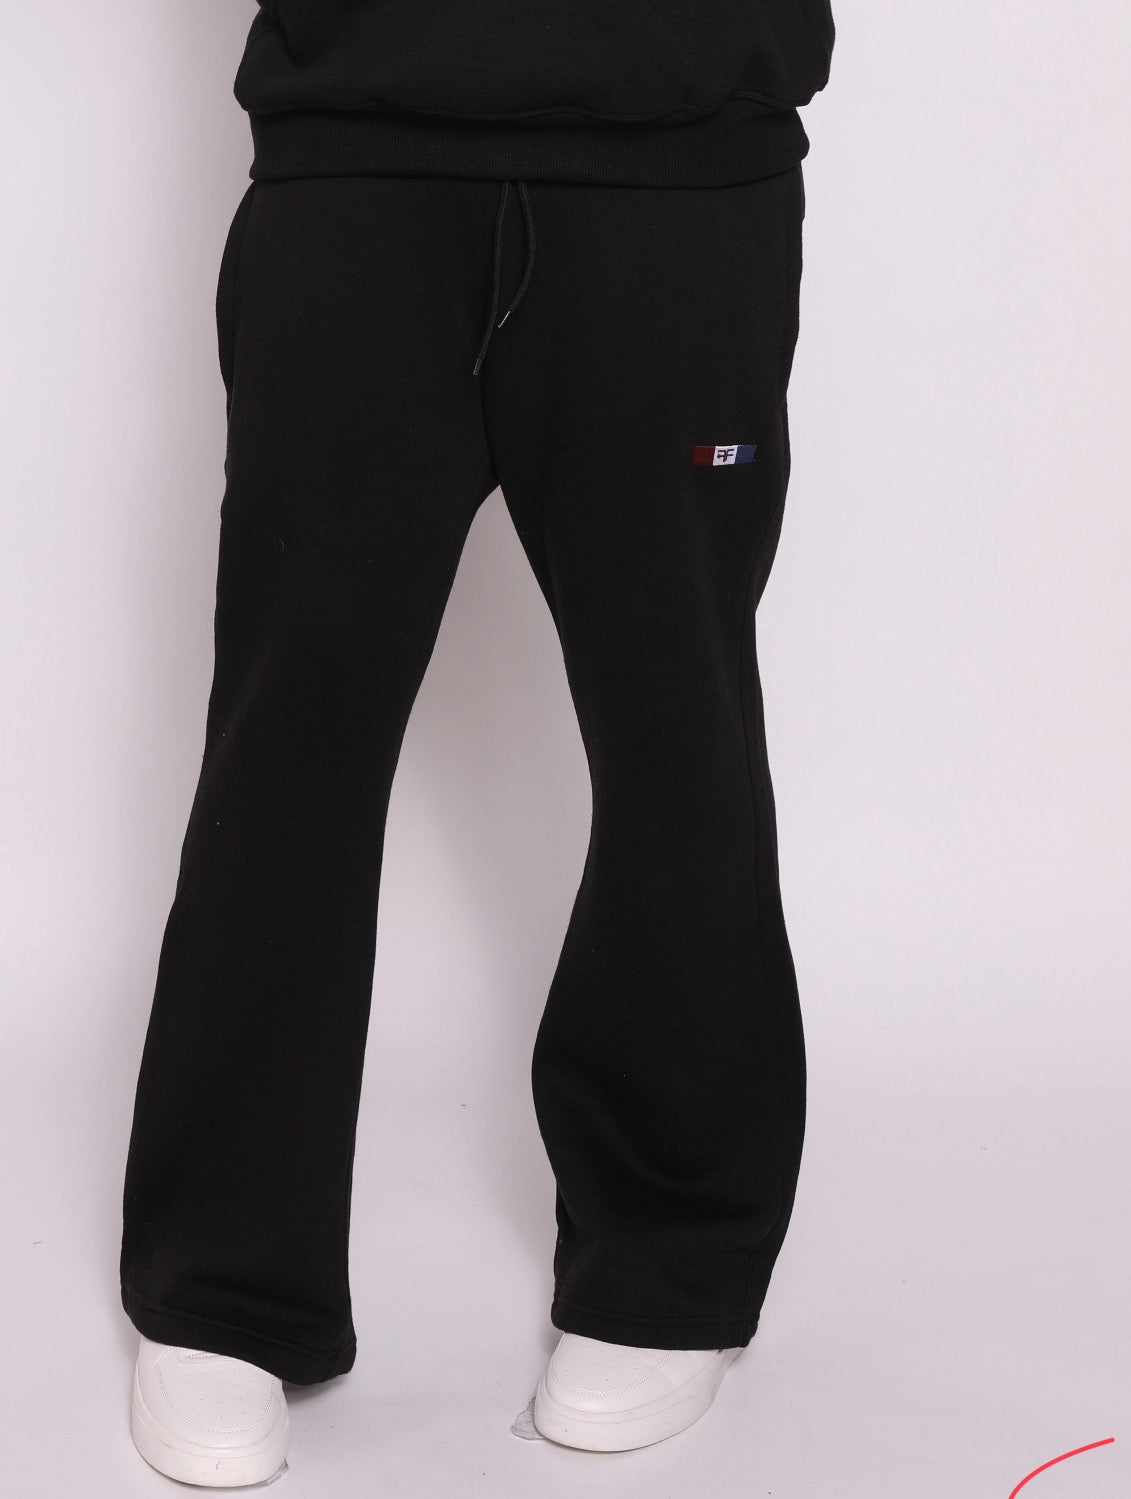 Flare Unisex Trousers with zipper pocket - Black